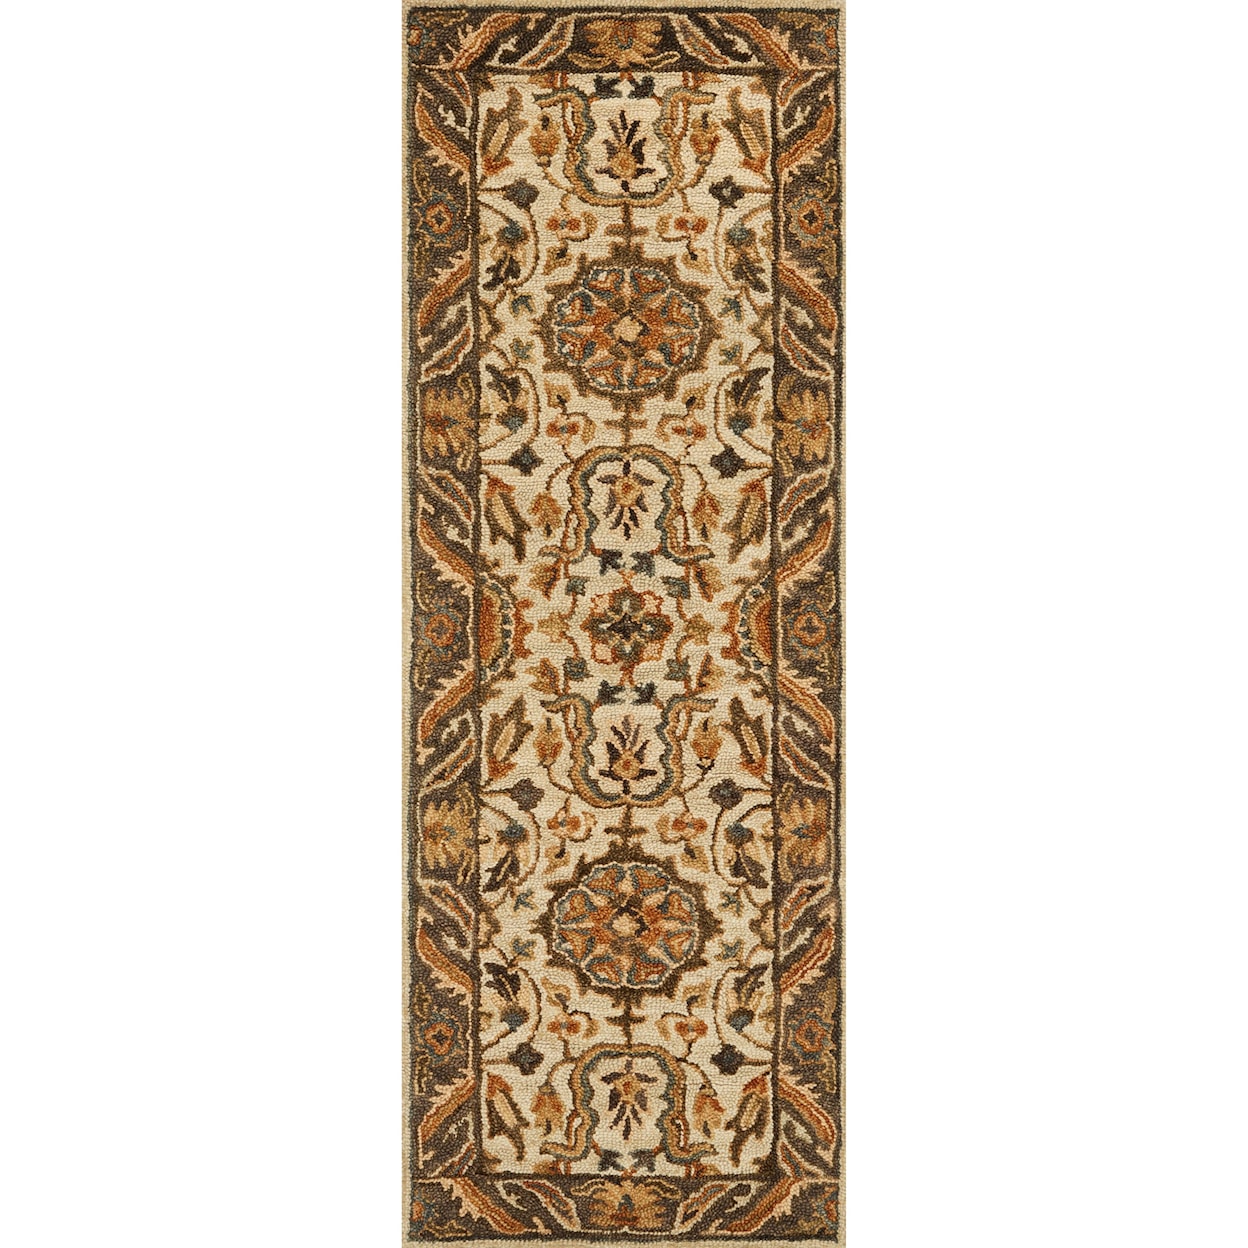 Loloi Rugs Victoria 1'6" x 1'6"  Ivory / Dk Taupe Rug